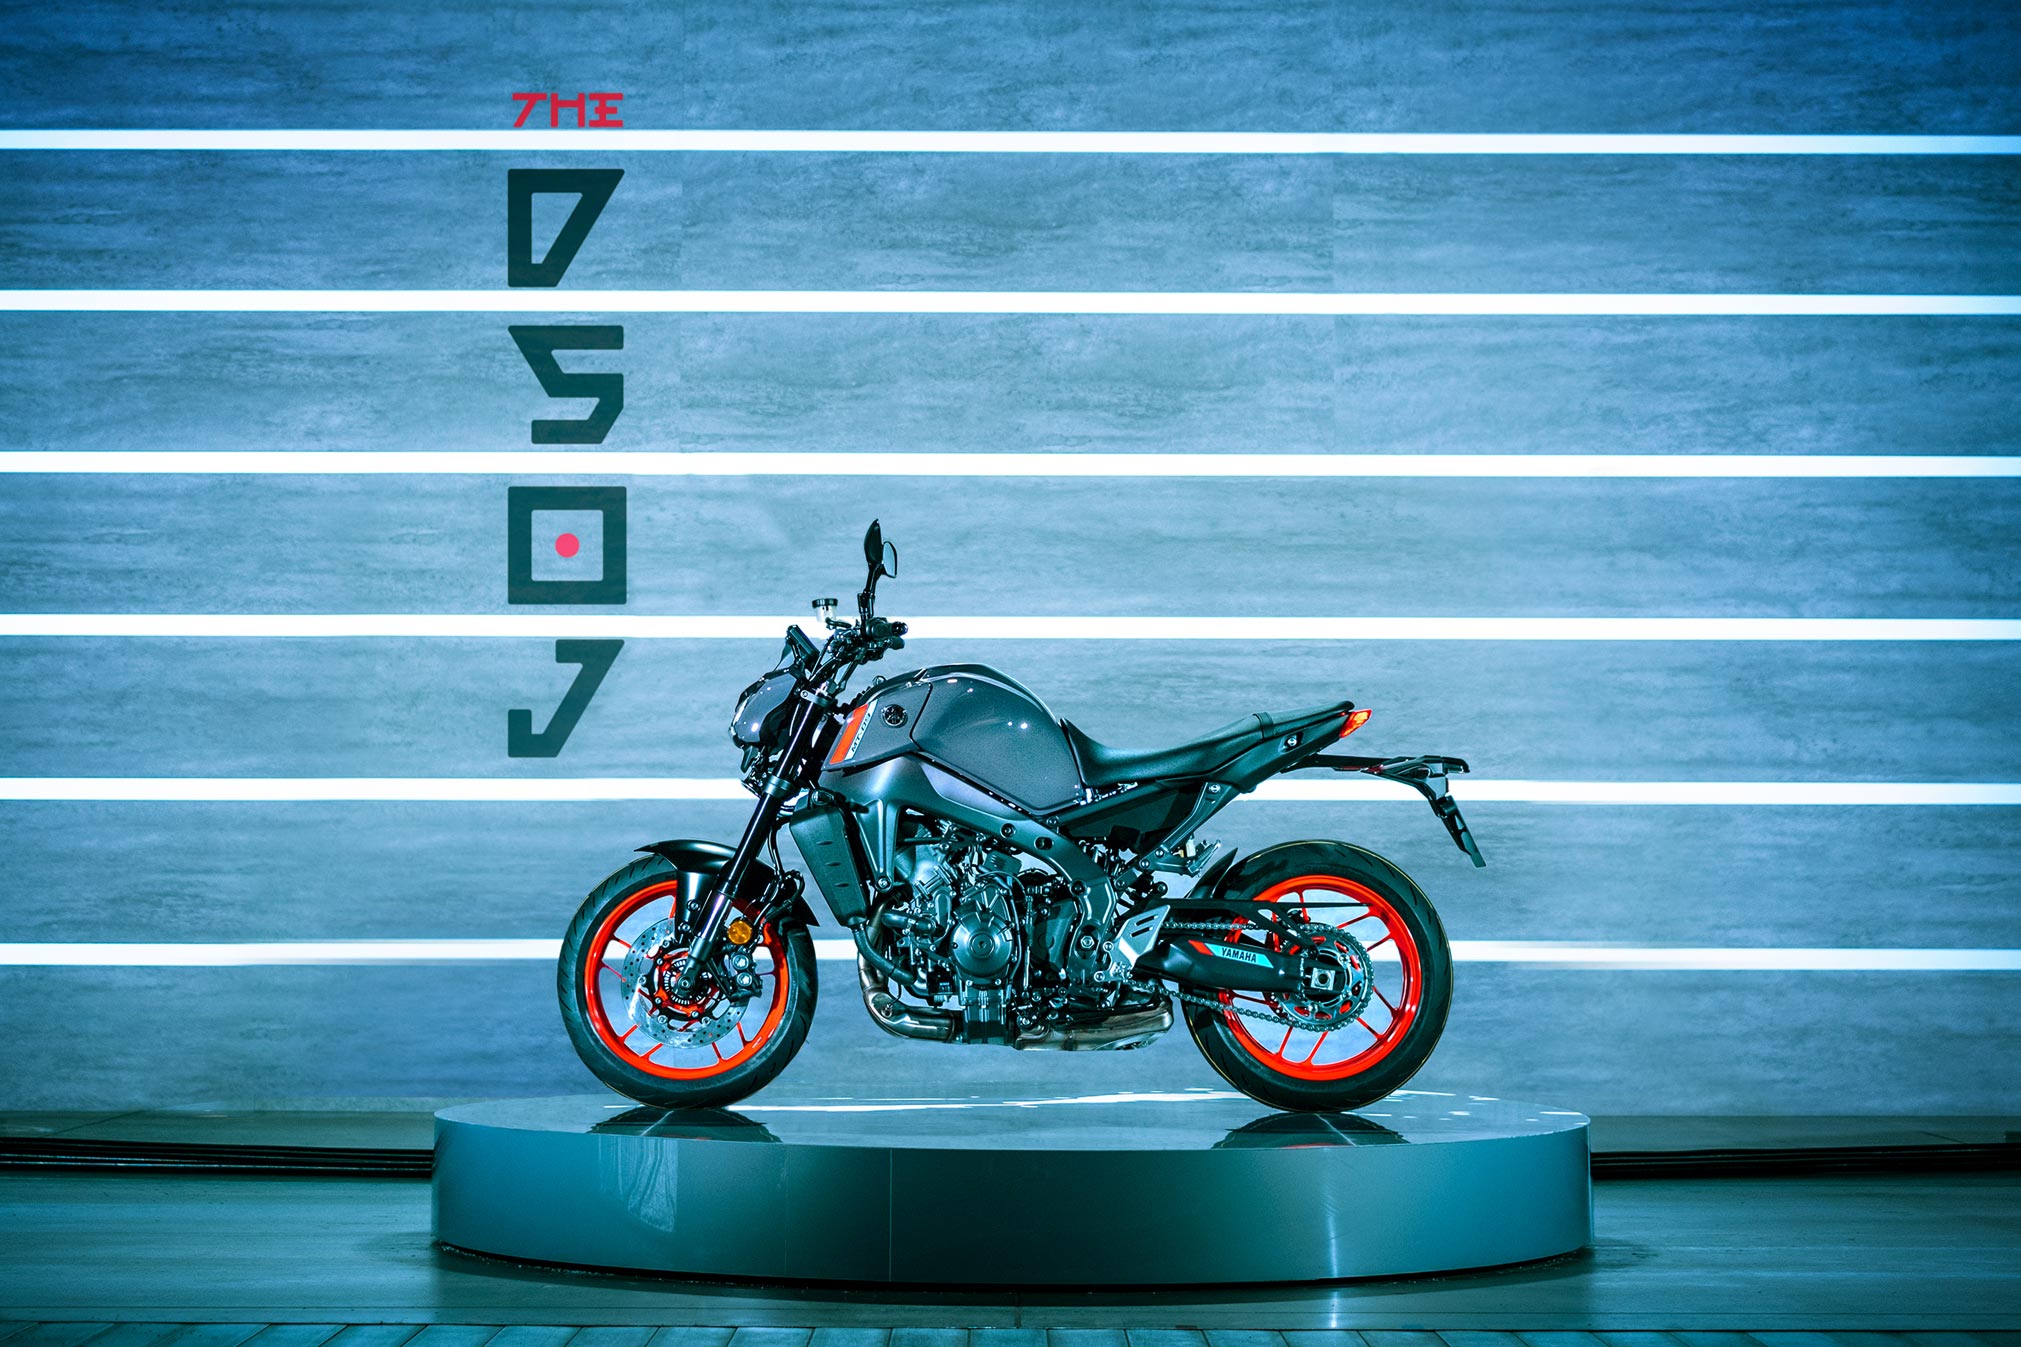 A side view of the Yamaha MT-09